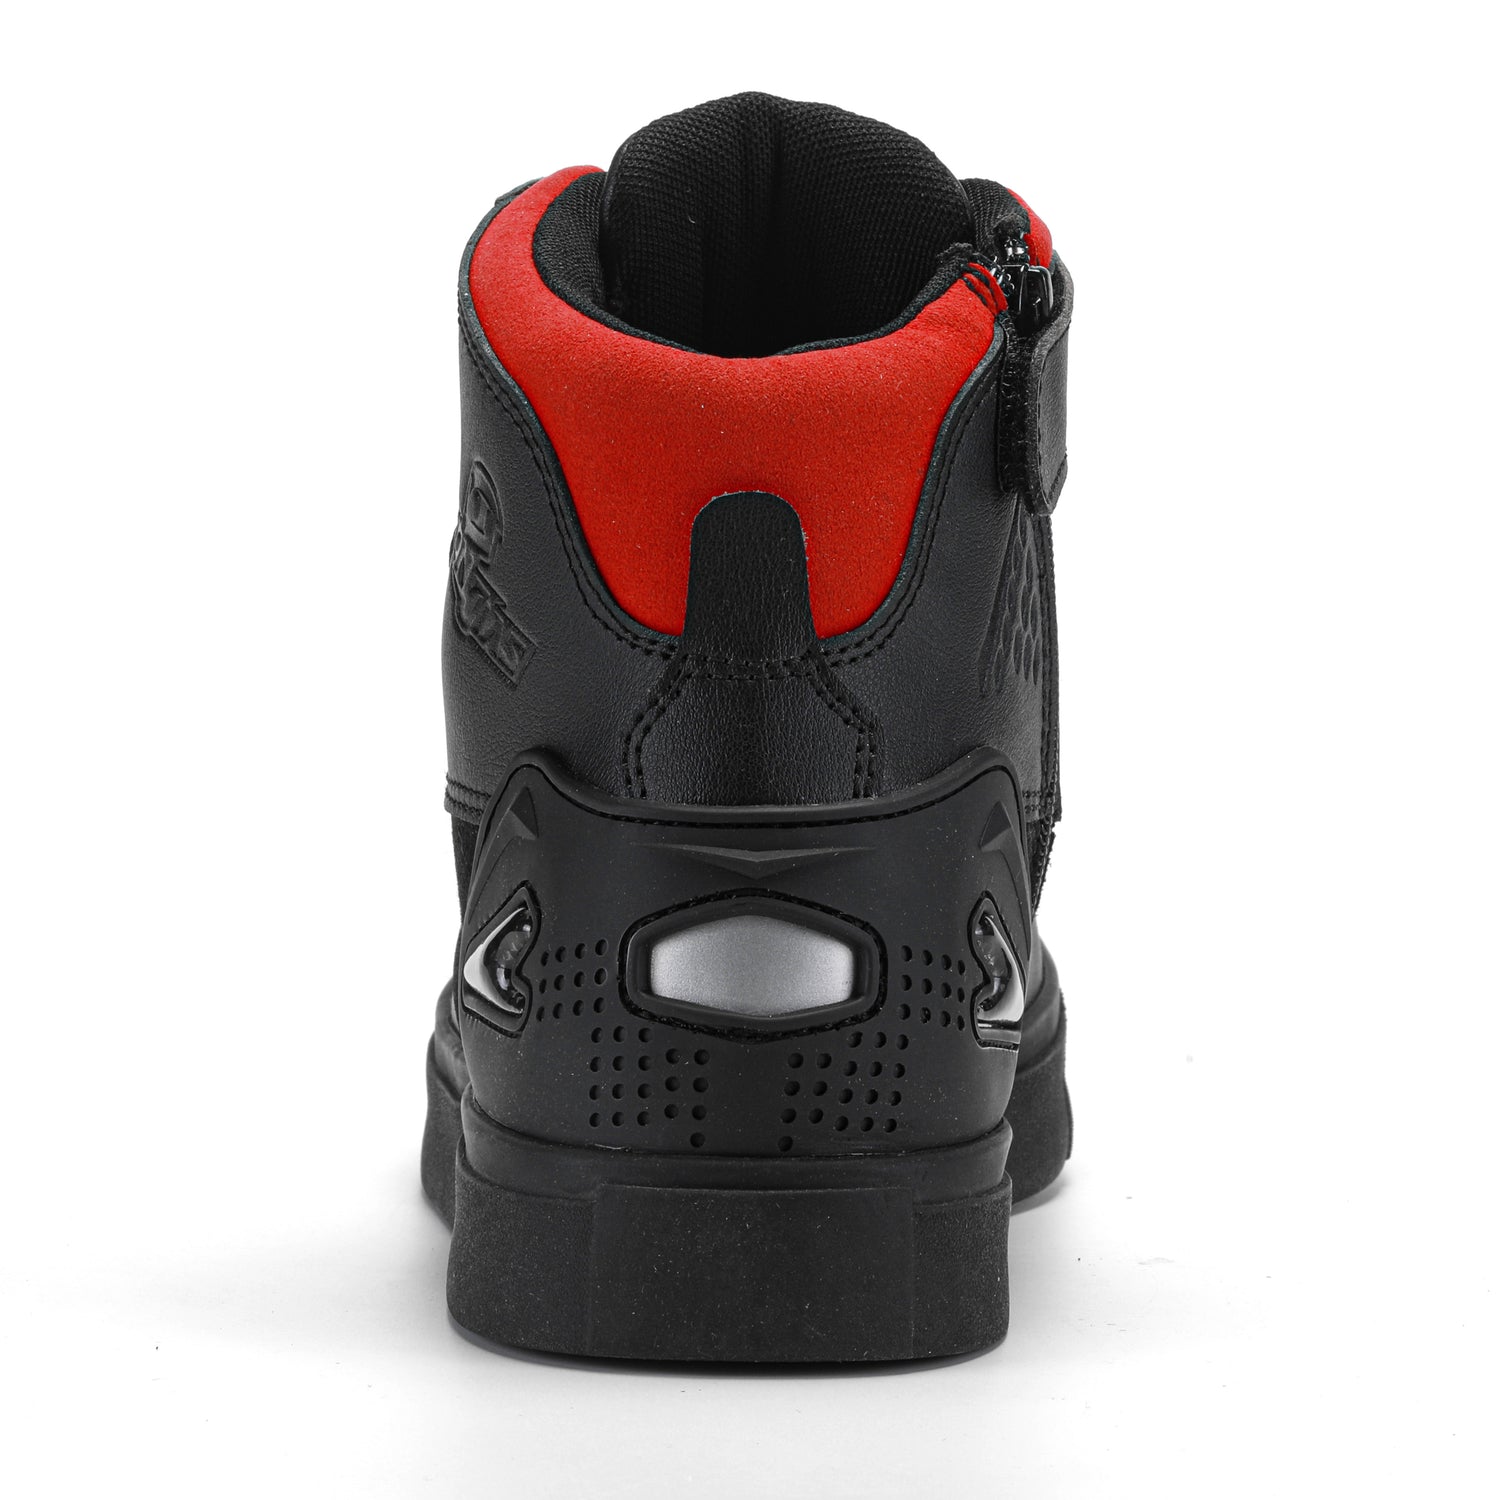 Rubber Sole Protective Motorcycle Shoes